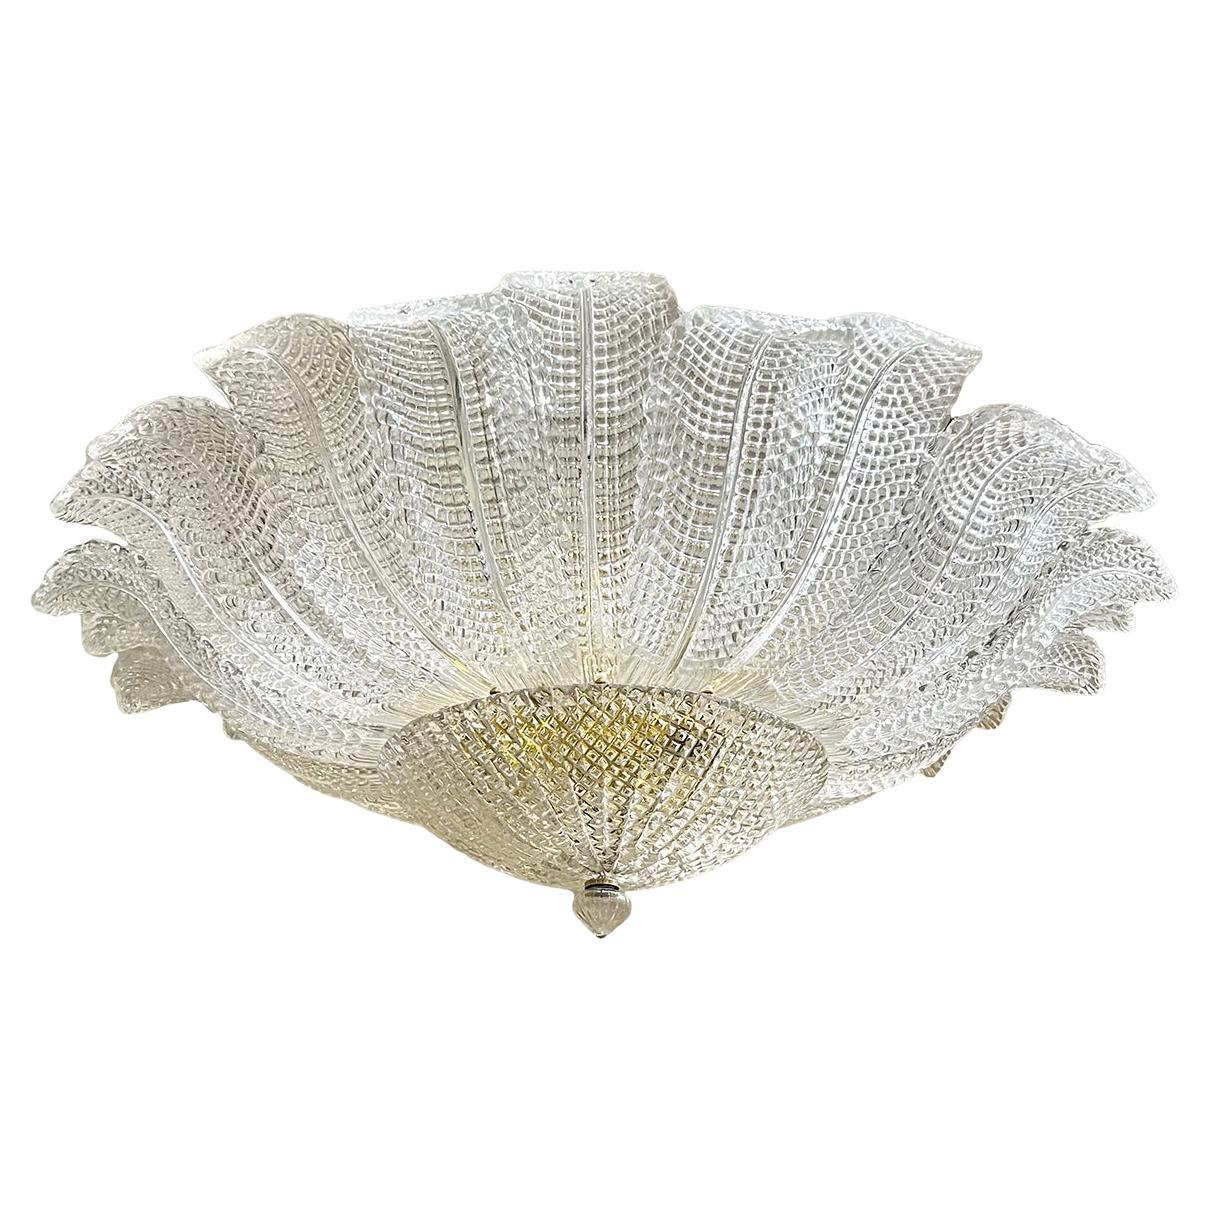 A circa 1960's Italian light fixture with molded glass leaves with 9 Edison lights.

Measurements:
Diameter: 43?
Drop: 15?.